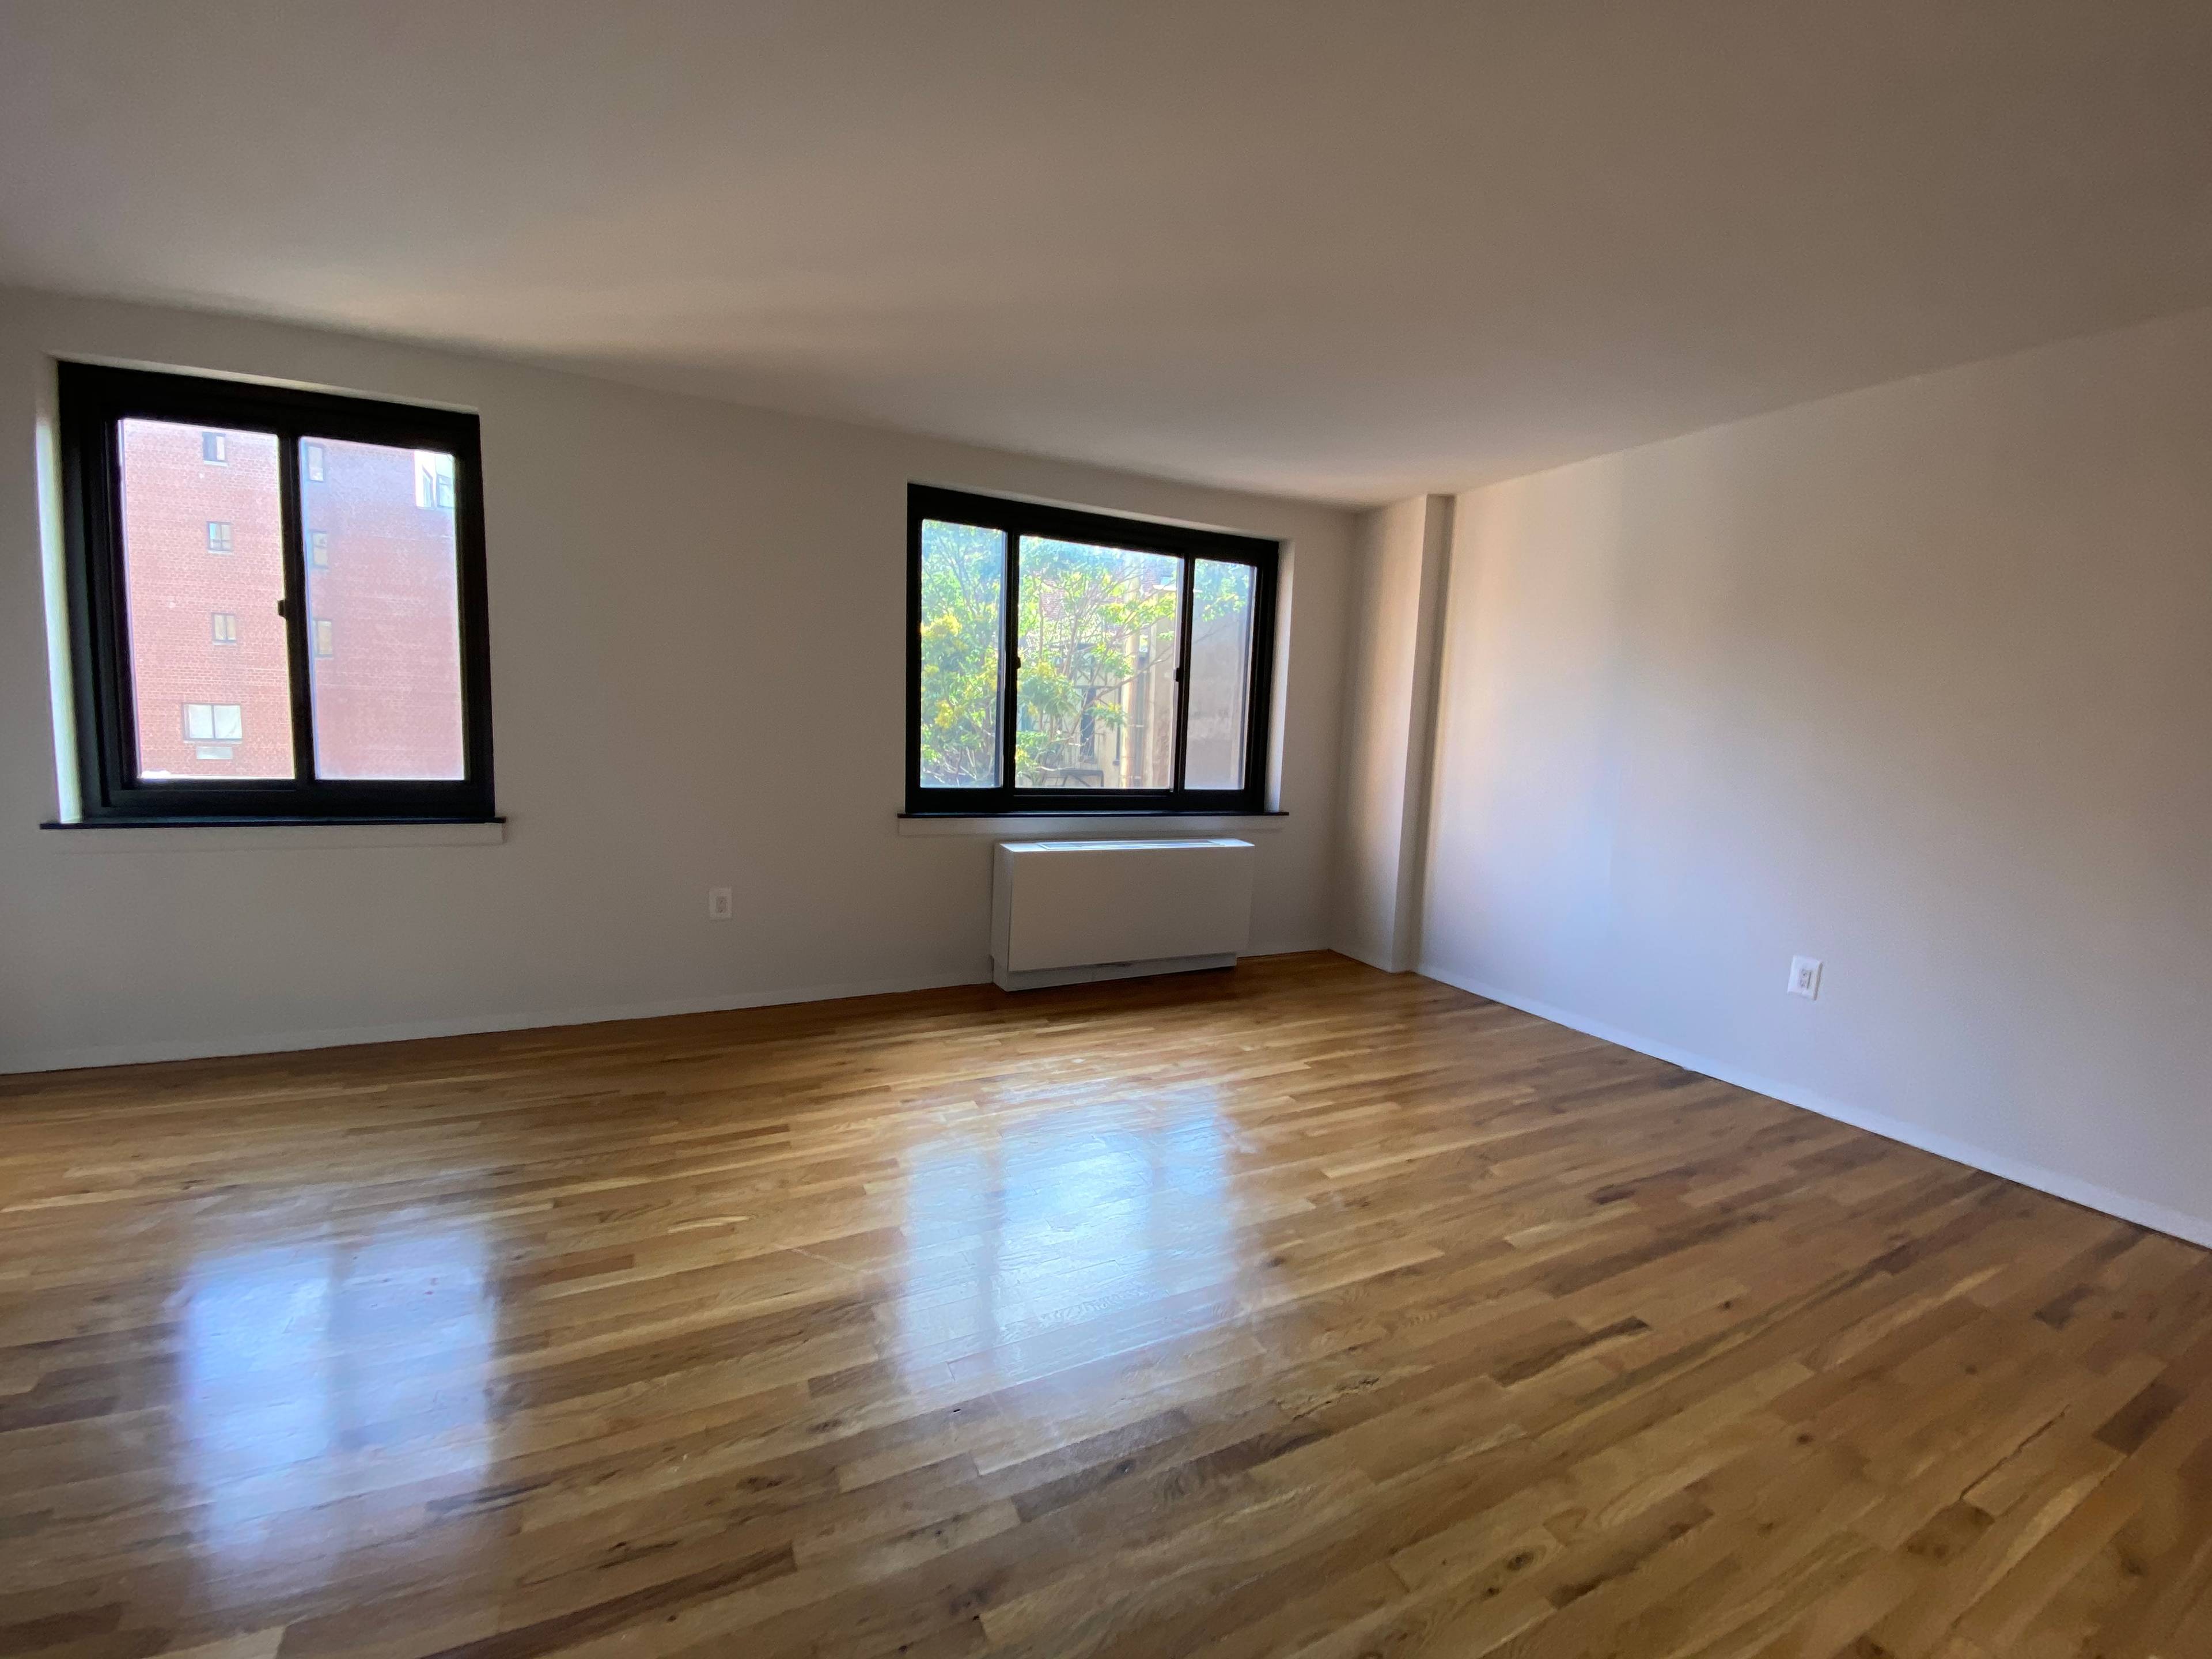 Spacious Alcove Studio Unit Beautiful oak flooring, granite countertops, stainless steel appliances with a dishwasher and a marble bathroom with over sized medicine cabinets.